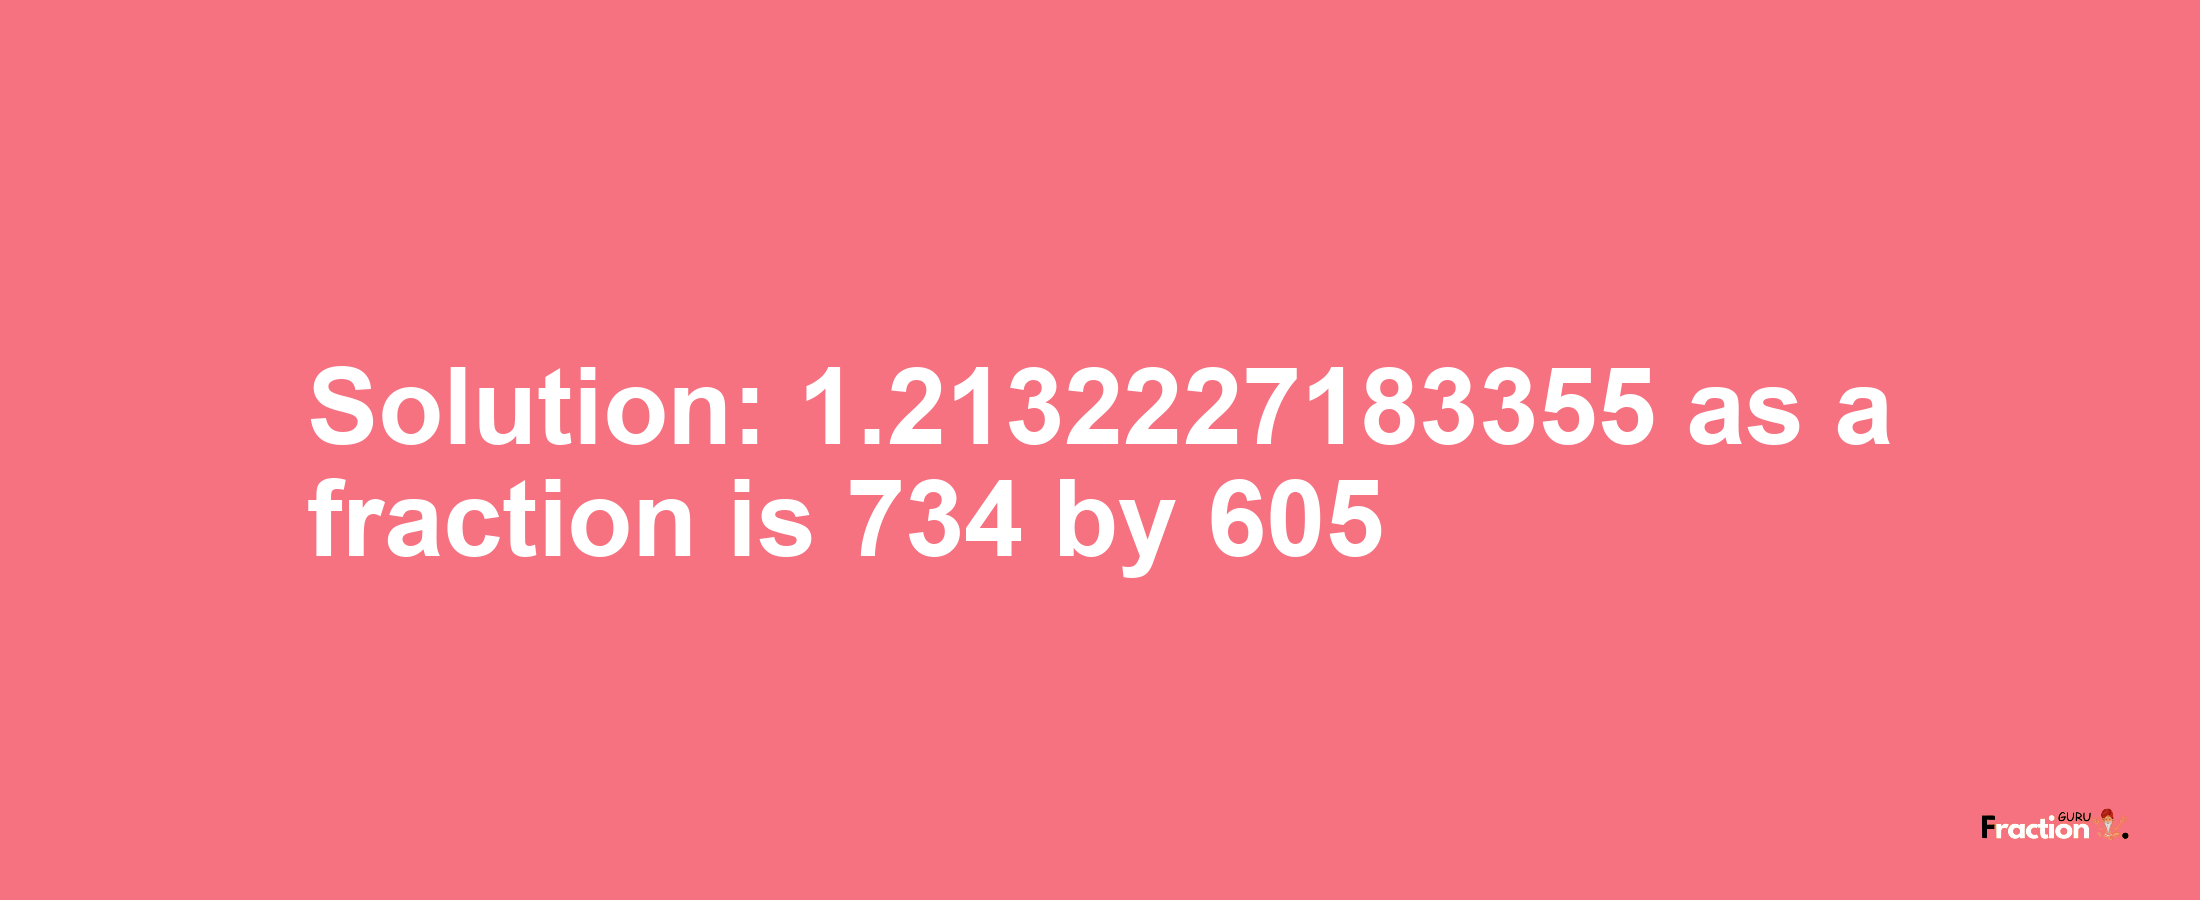 Solution:1.2132227183355 as a fraction is 734/605